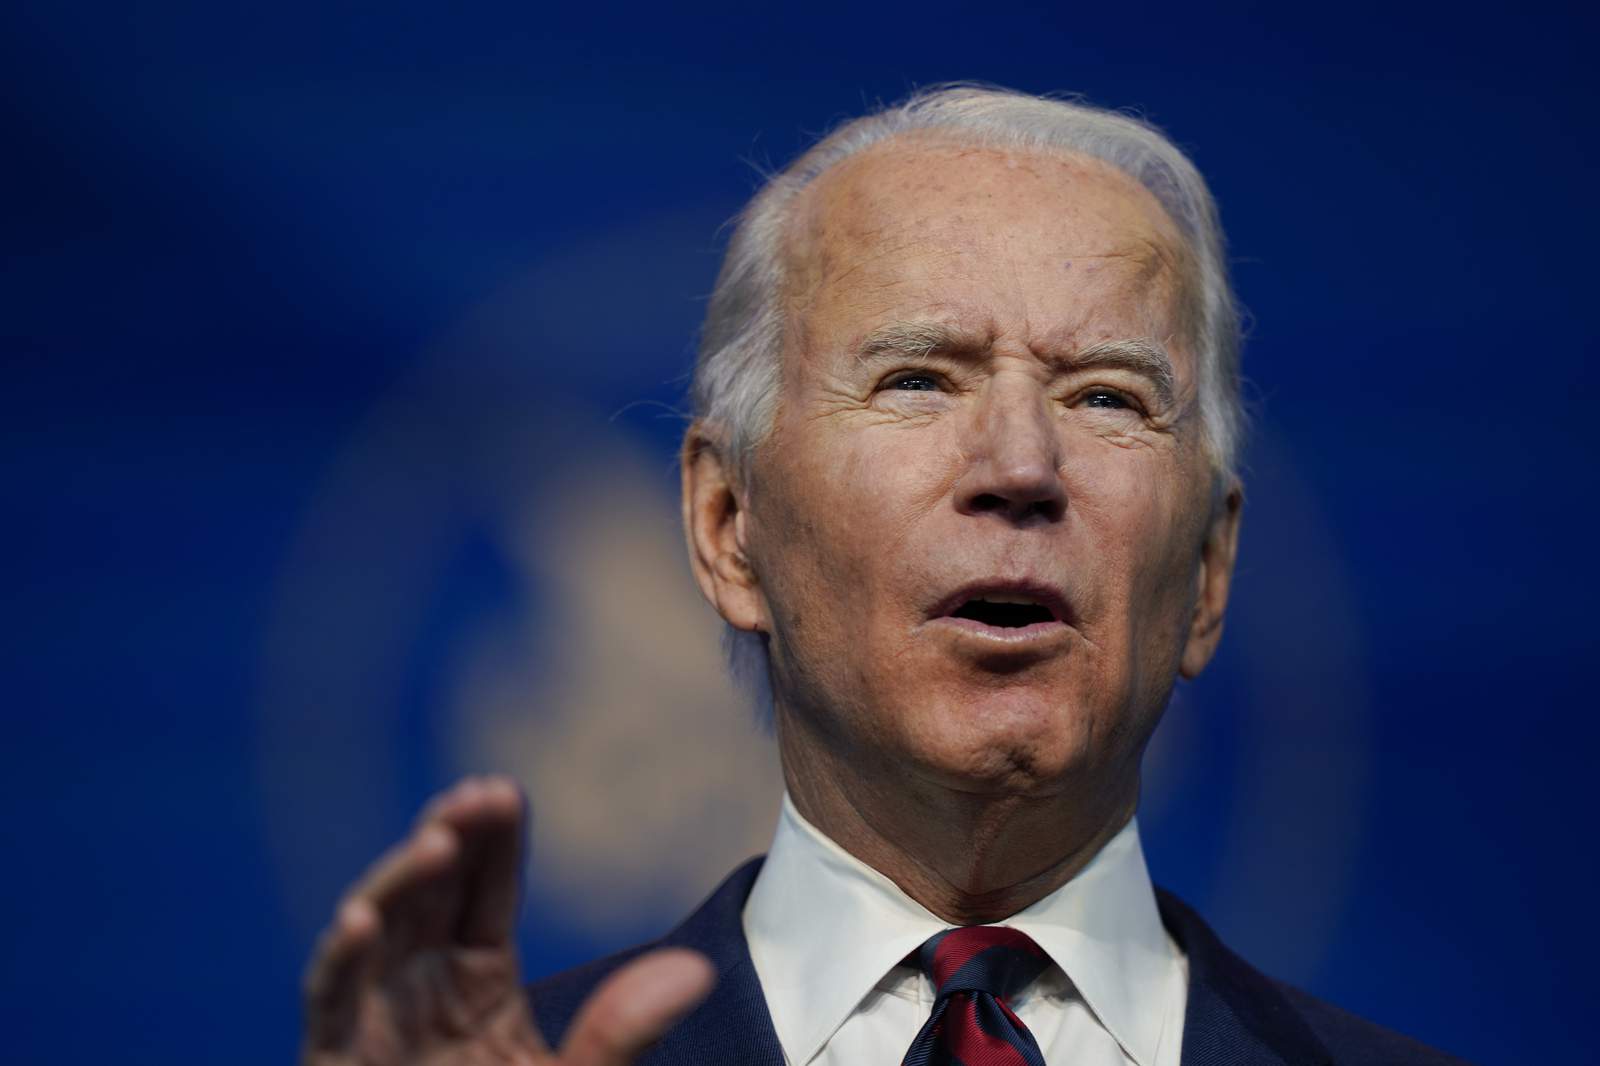 Biden introduces his climate team, says ‘no time to waste’